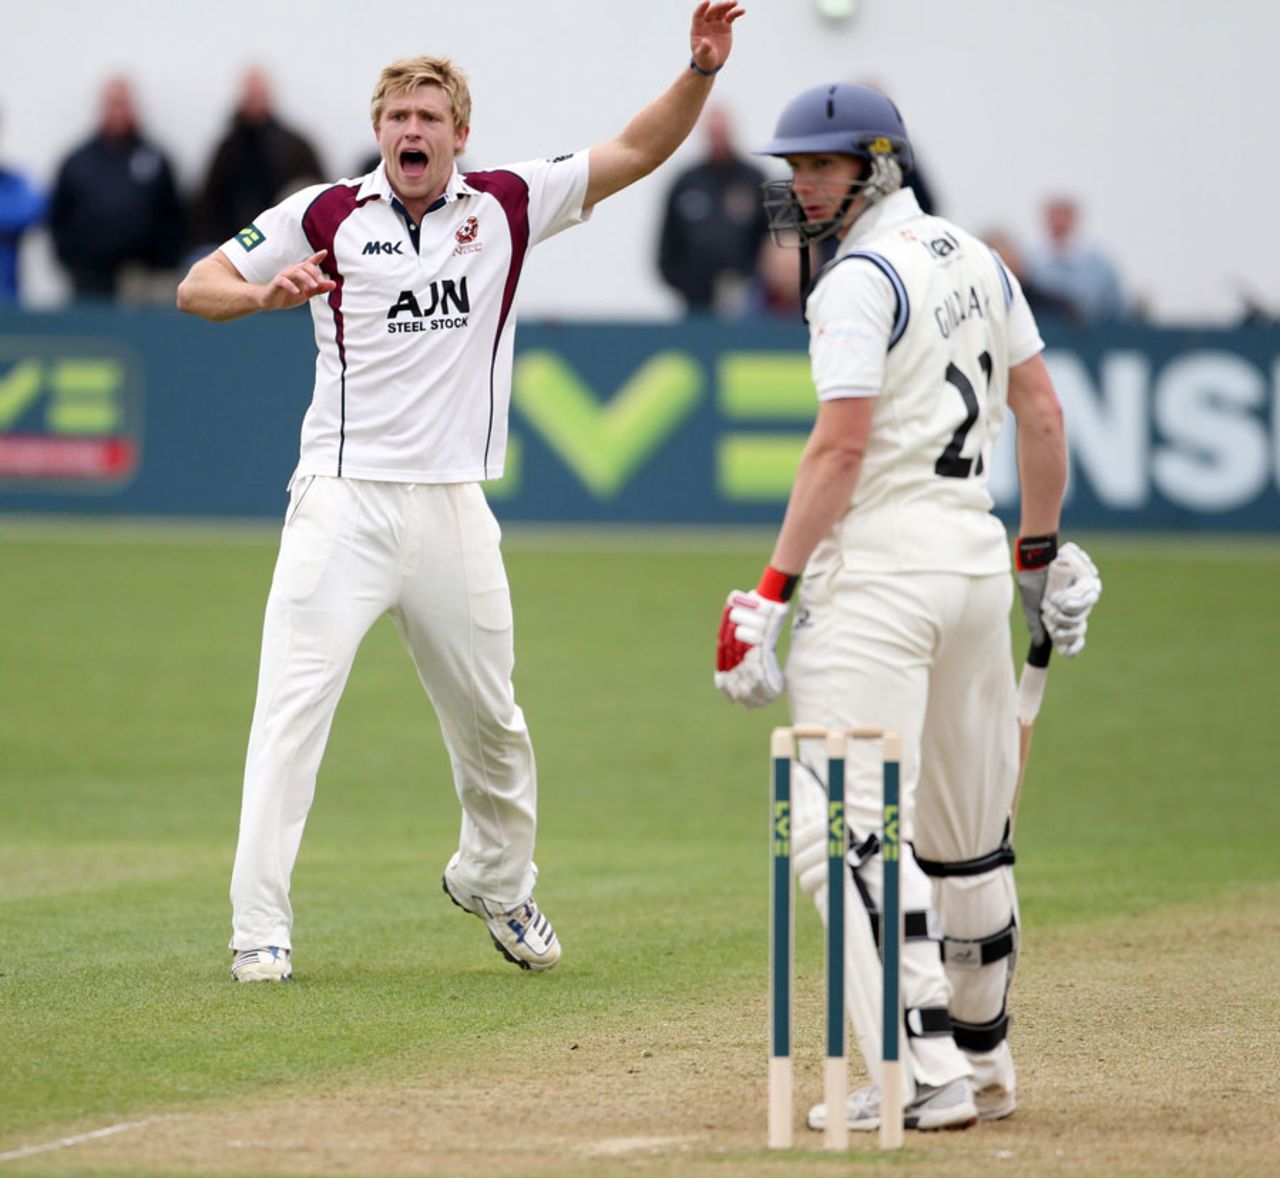 David Willey again impressed with 4 for 71, Gloucestershire v Northamptonshire, County Championship, Division Two, Bristol, 1st day, April 24, 2013